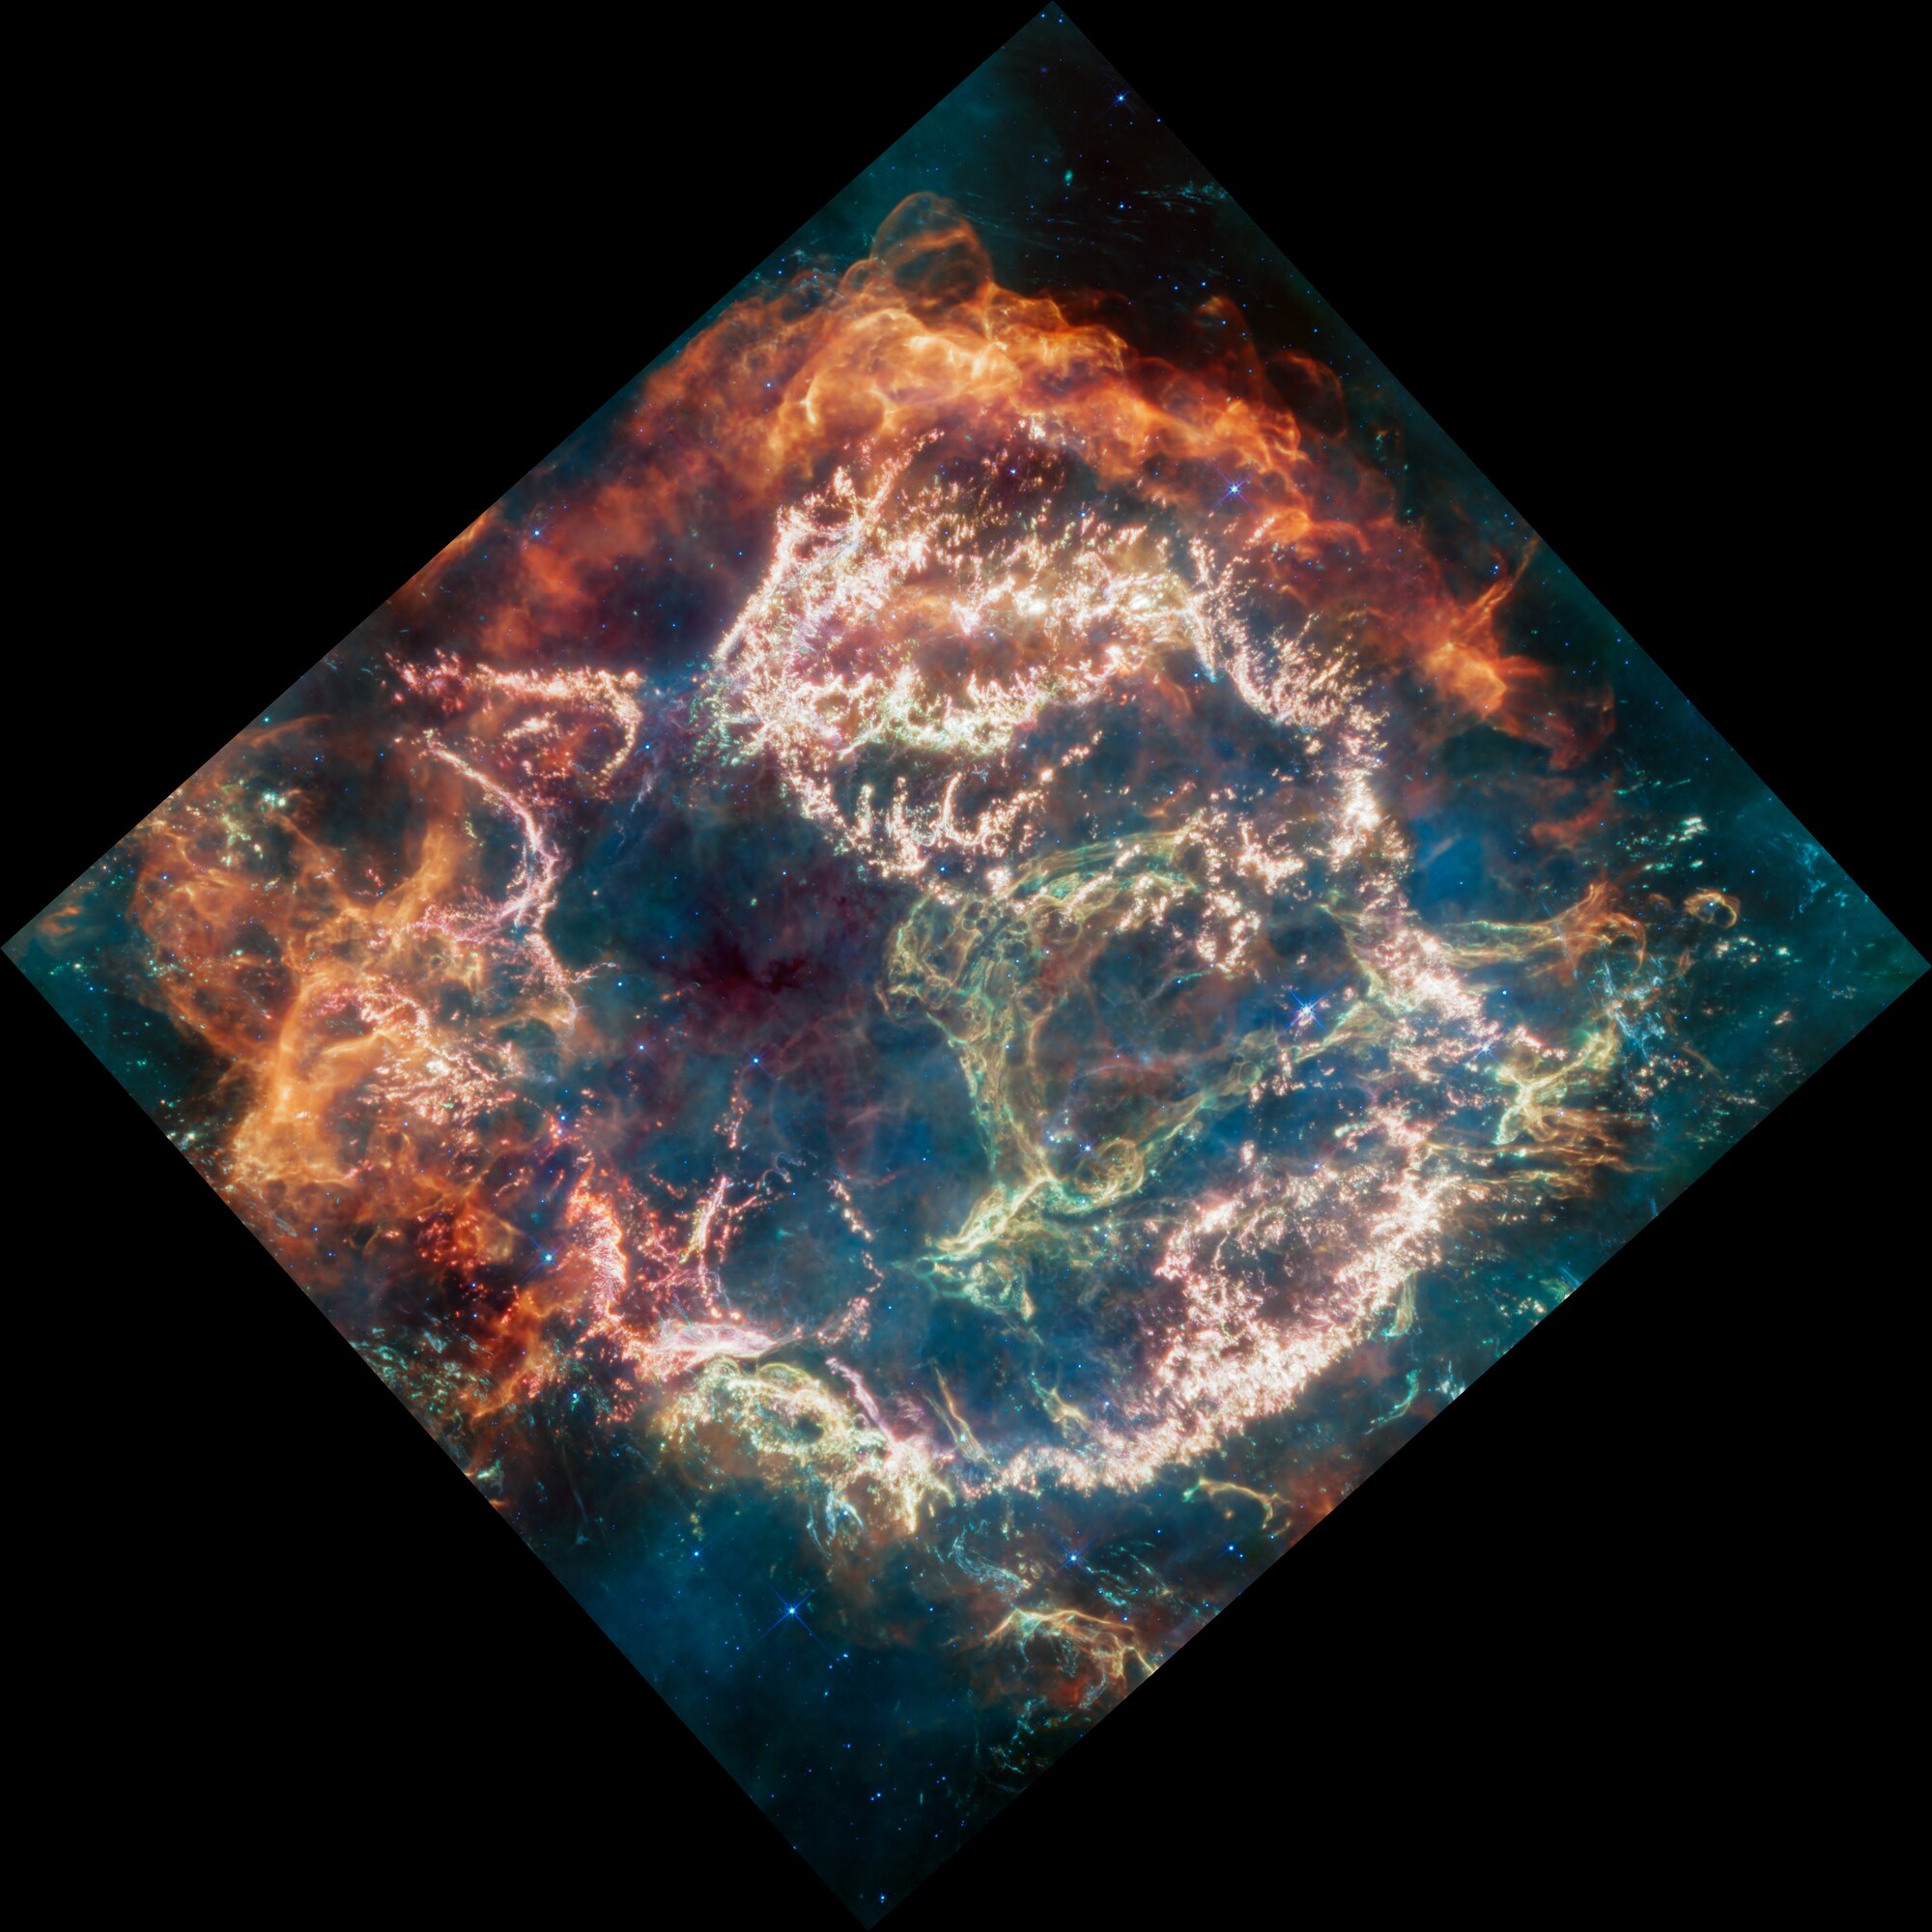 A colourful picture of a supernova remnant.